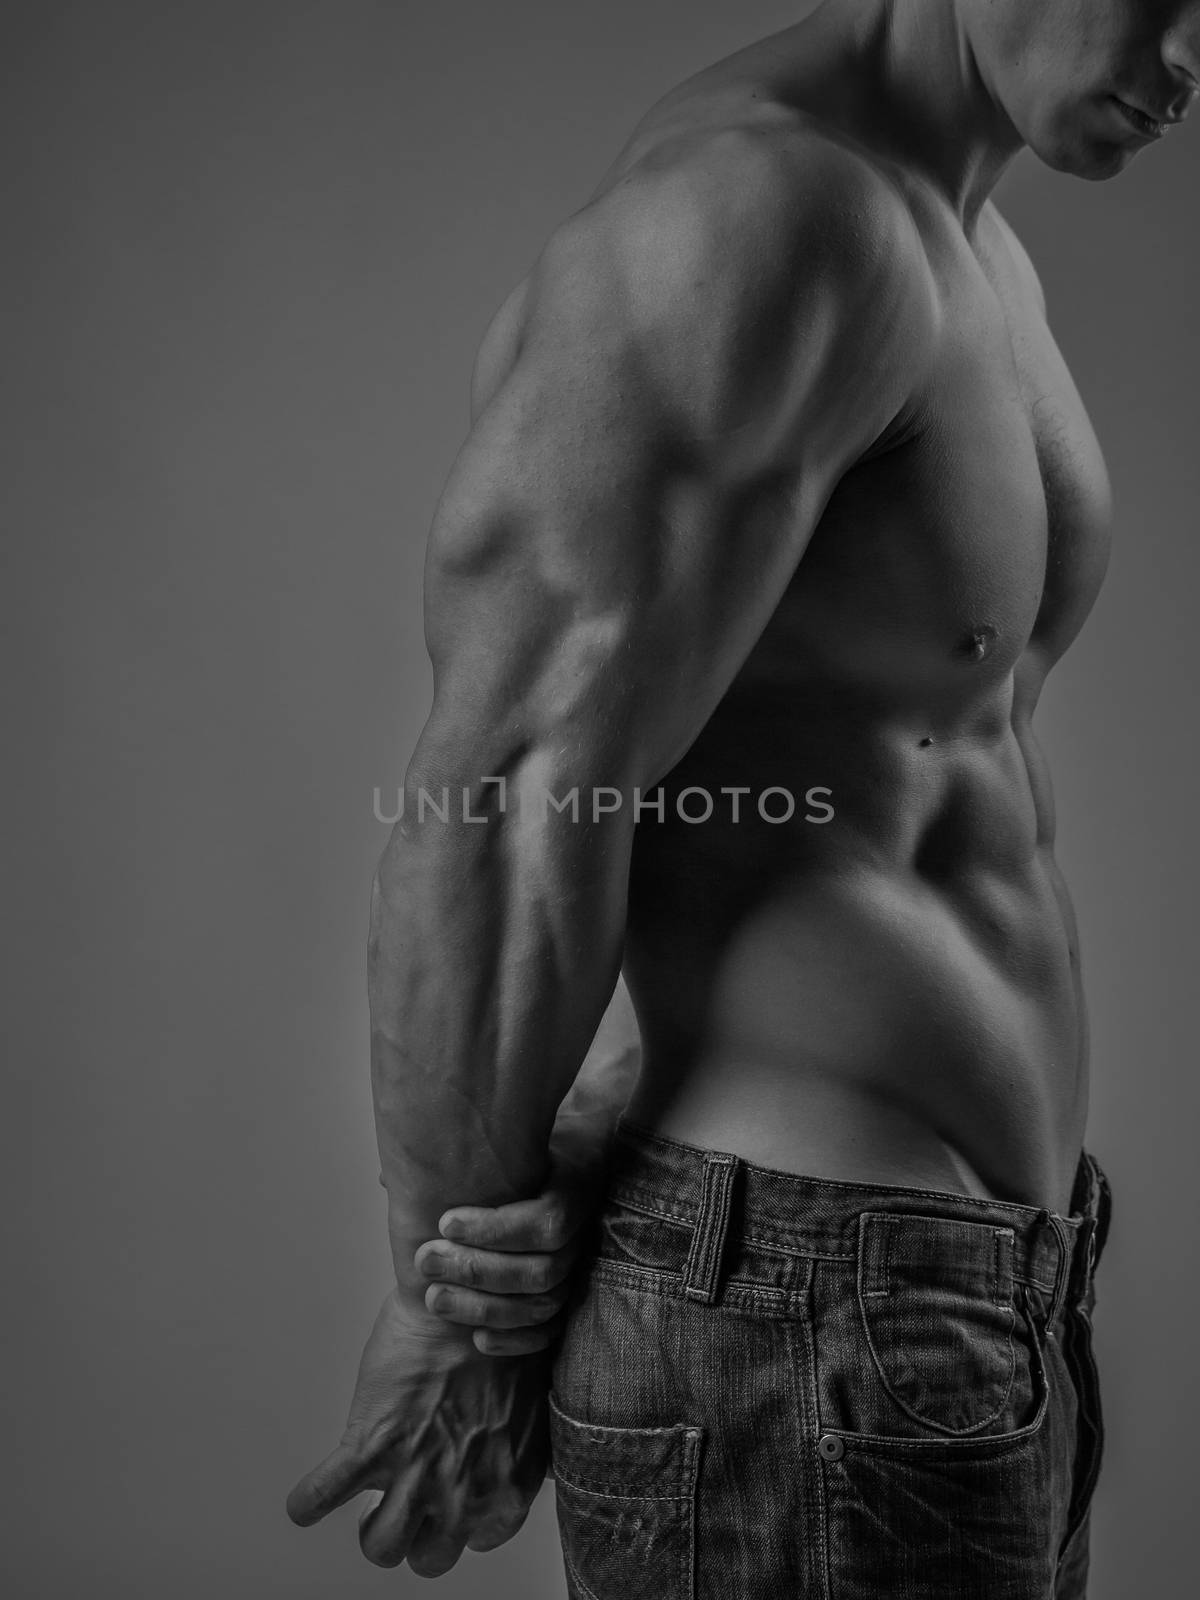 Side view of a muscular young man posing shirtless